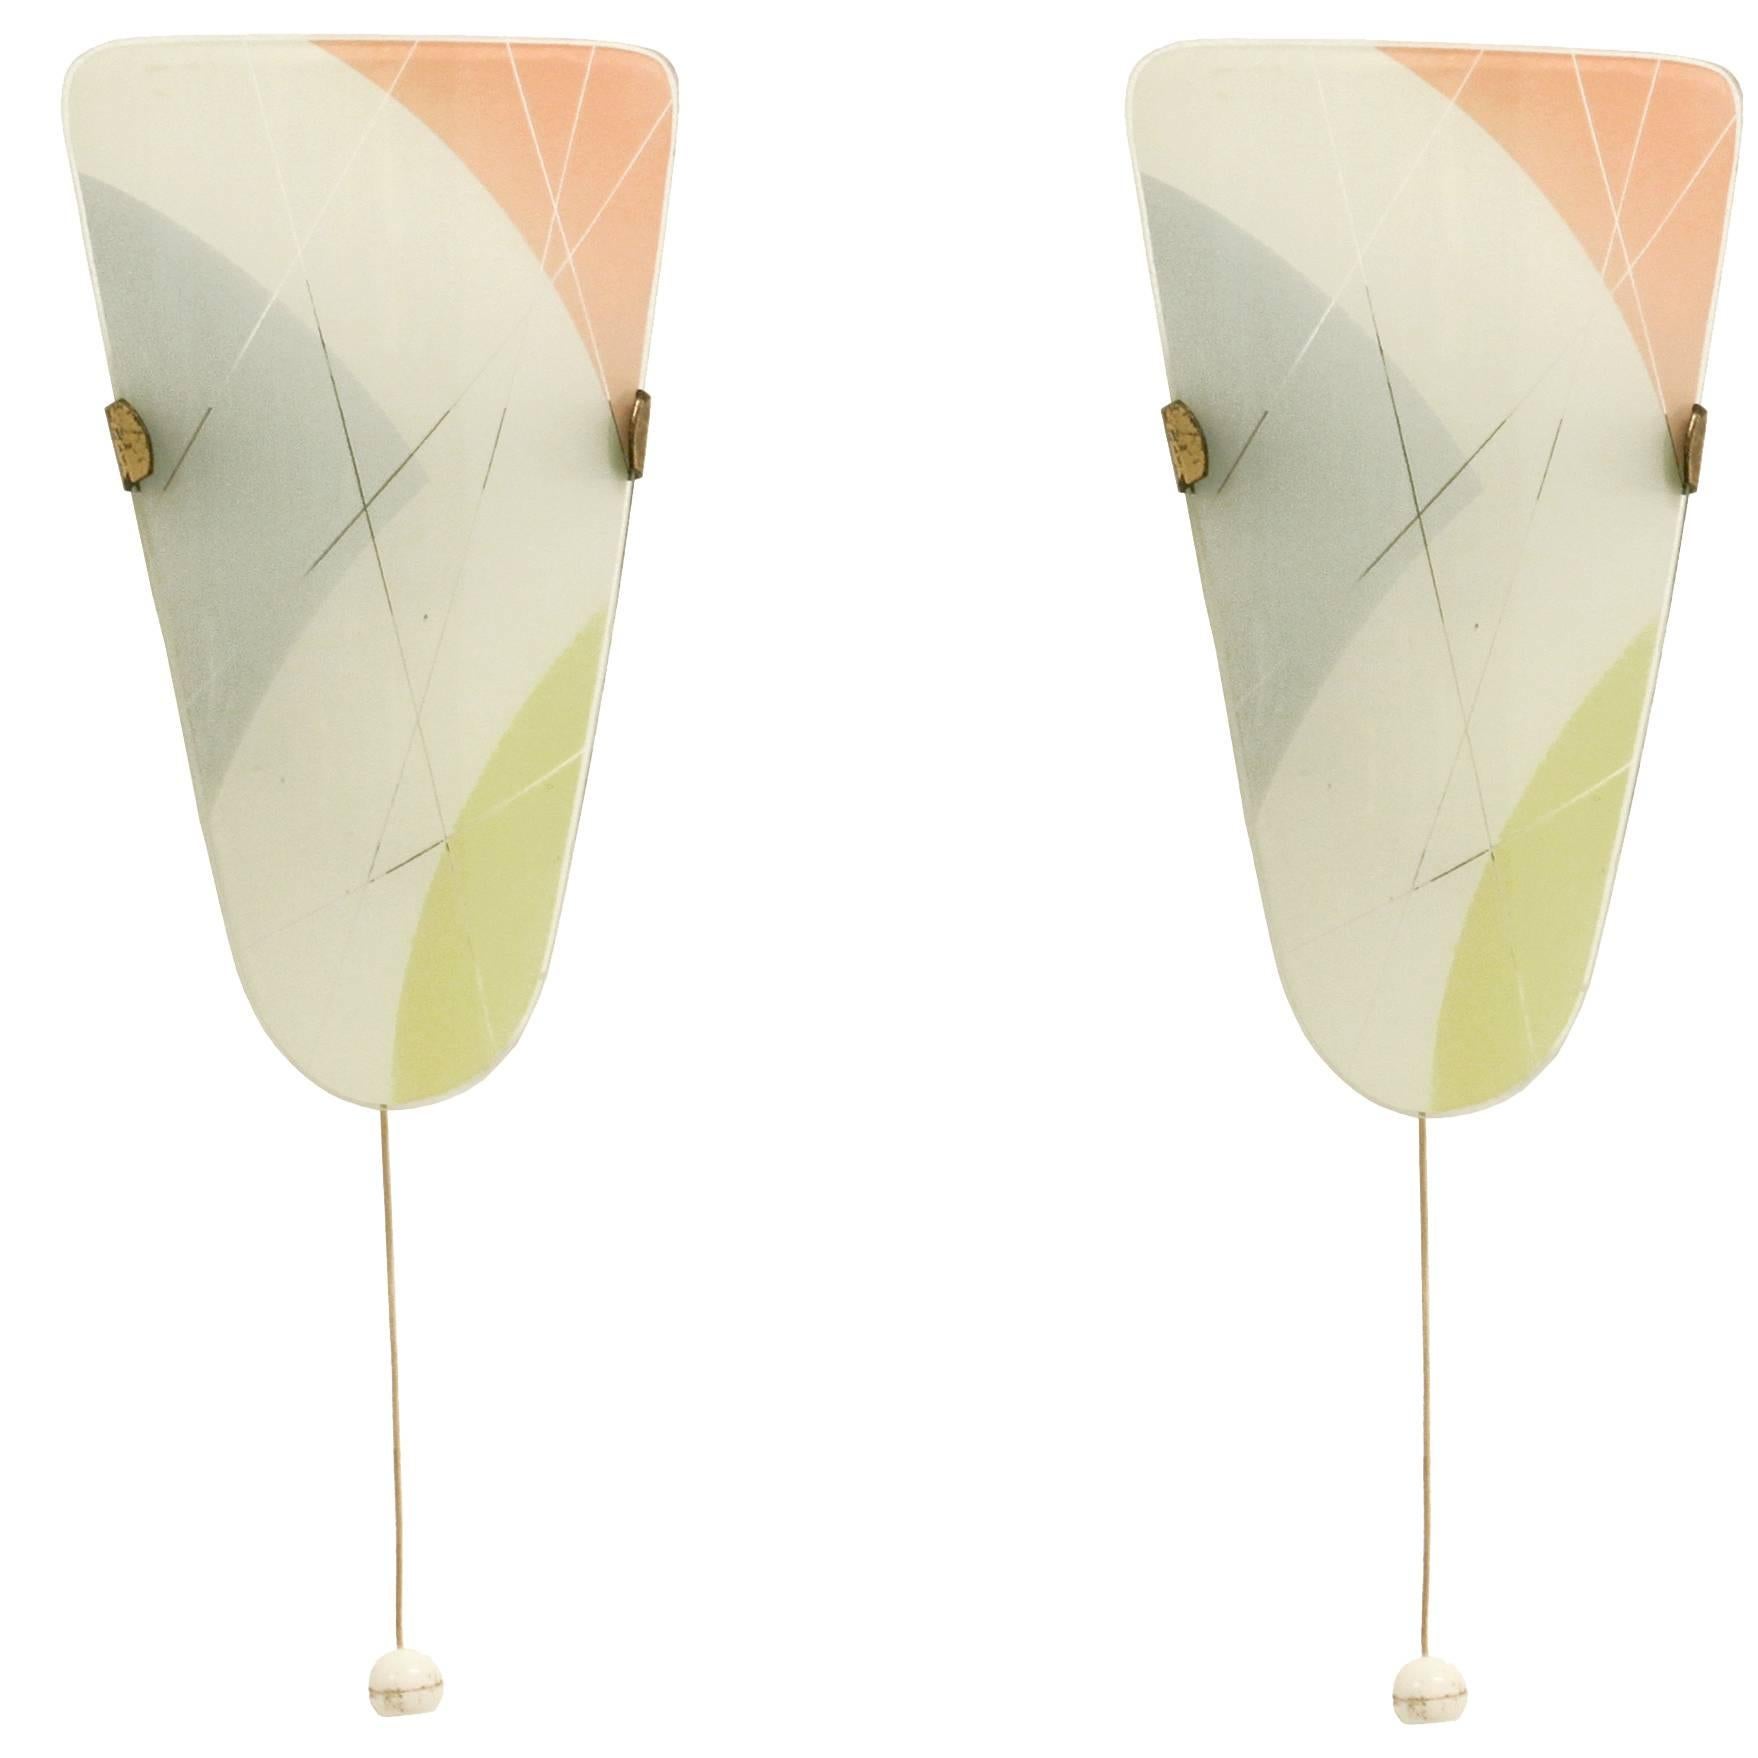 Pair of Functionalist Wall Lights, Anonymous, 1950s For Sale